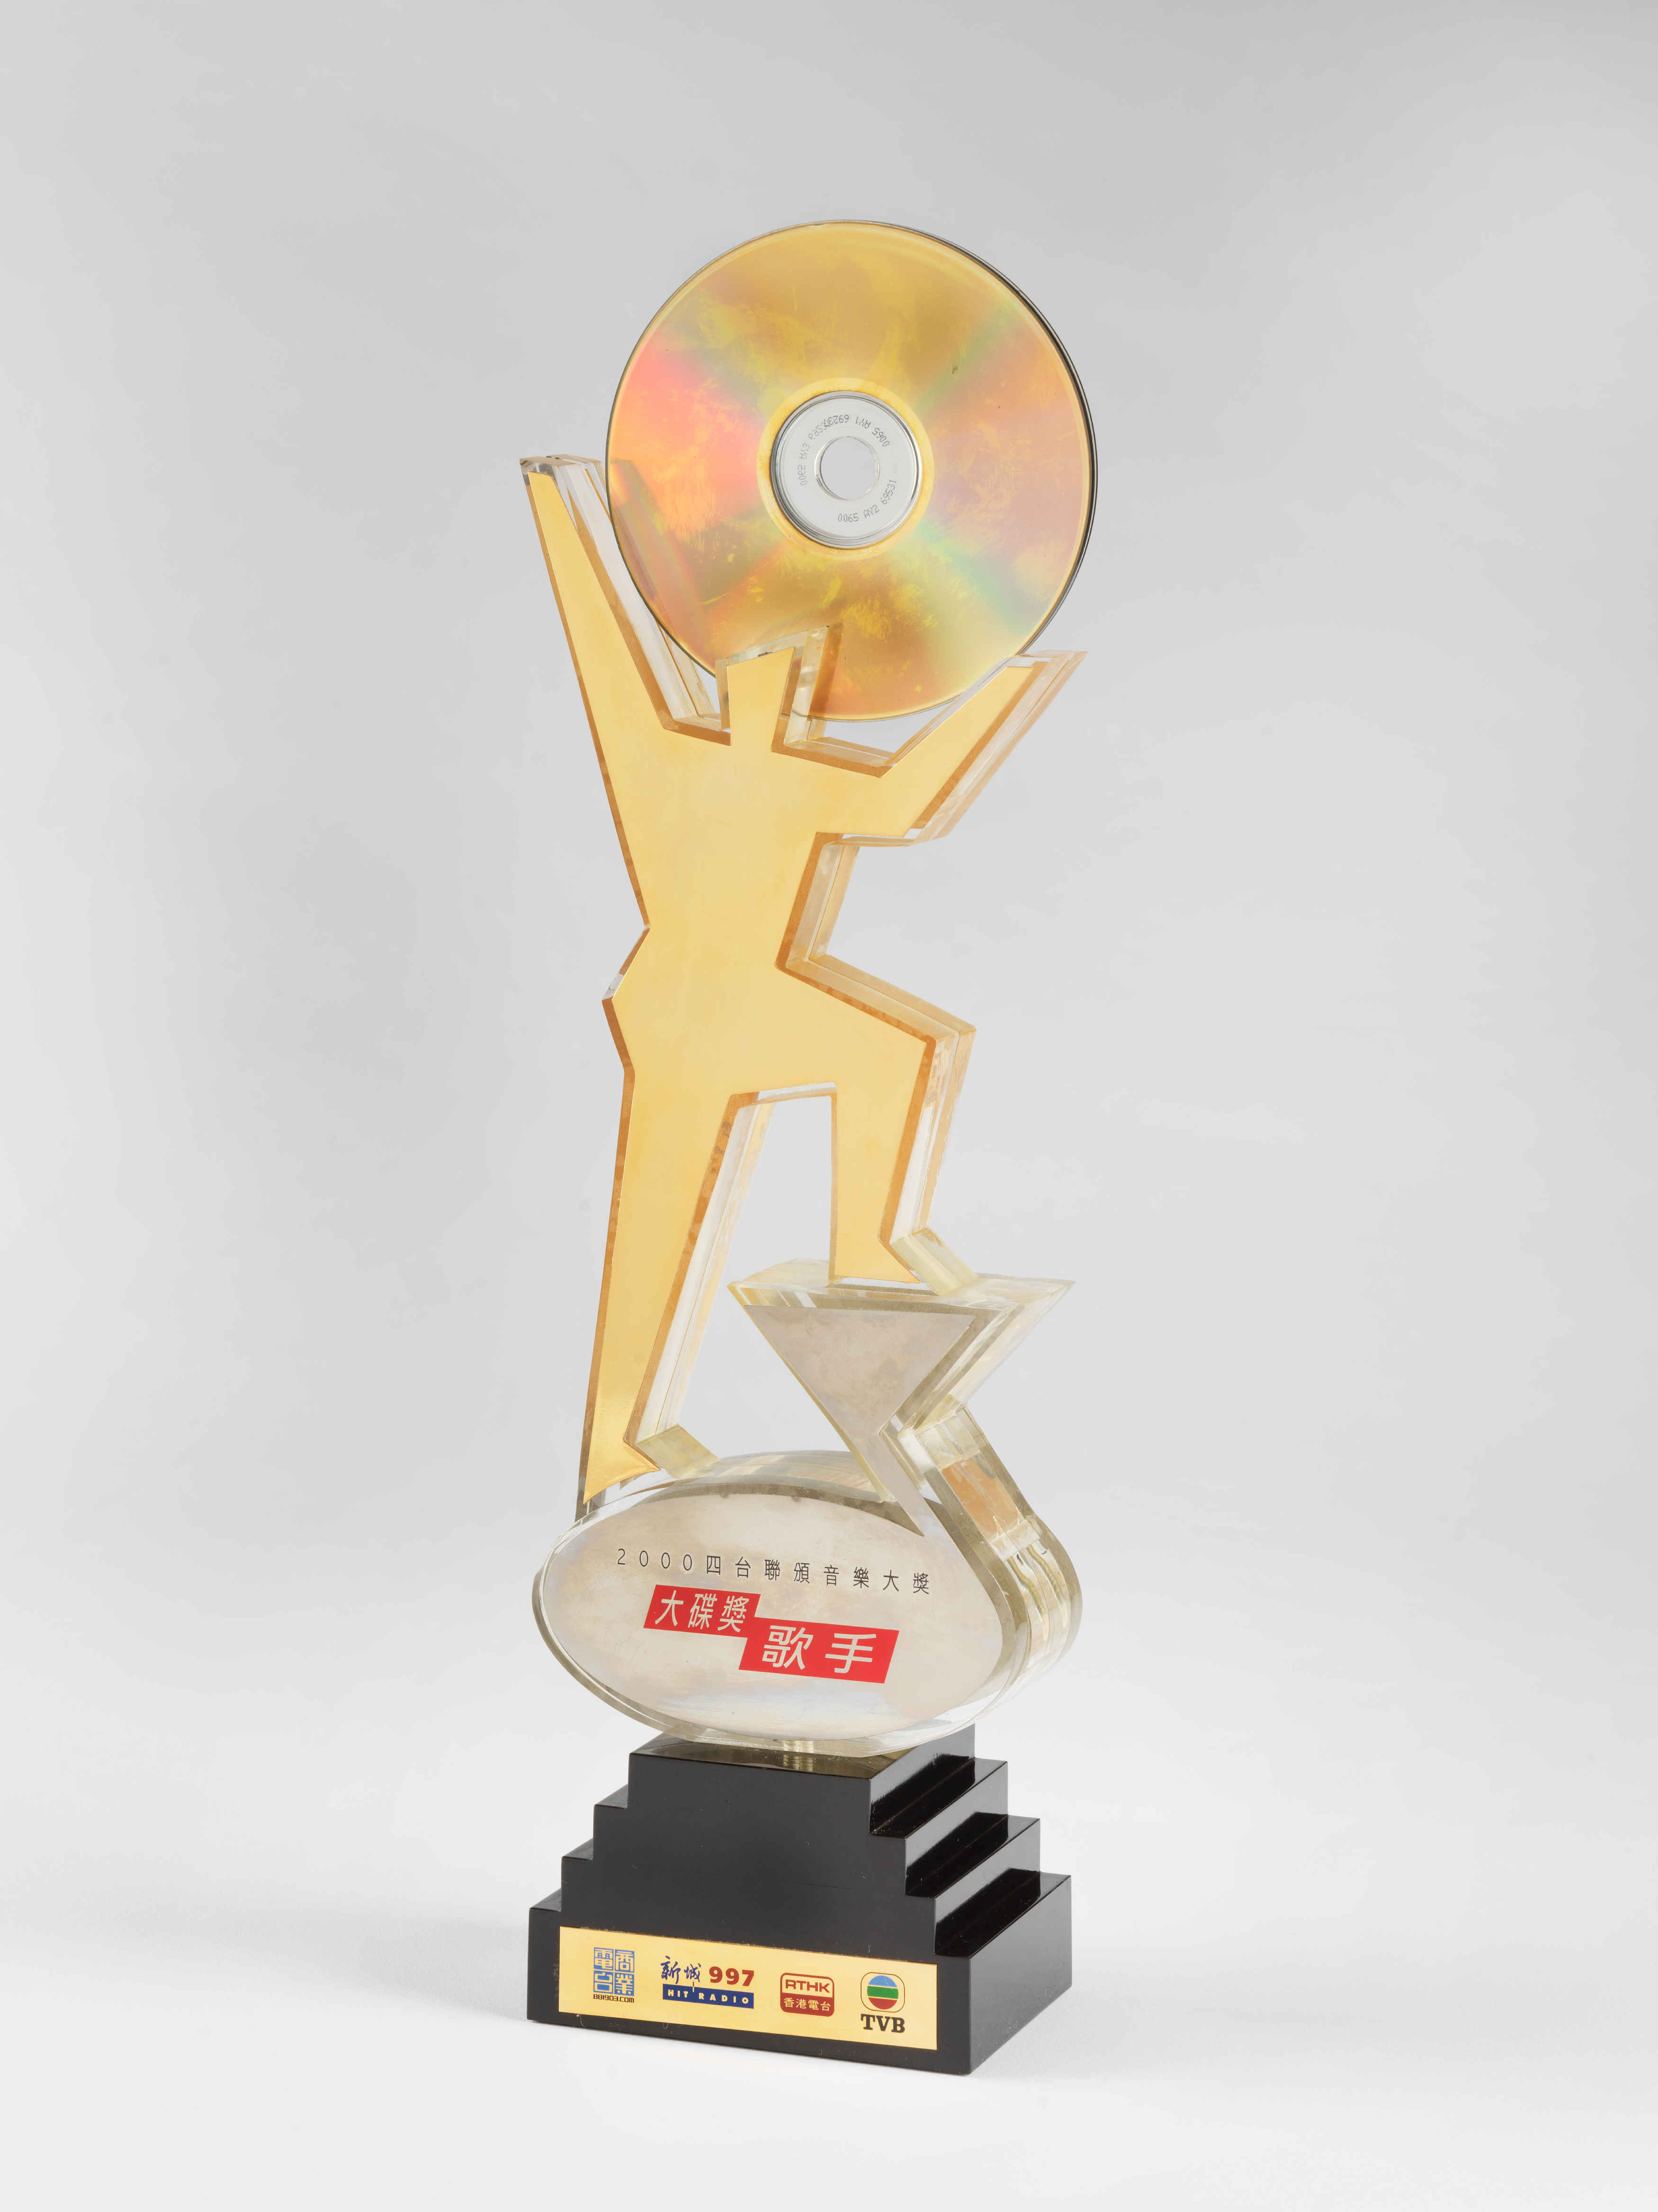 Best Album Award of the Four Channels Song Award – Untitled